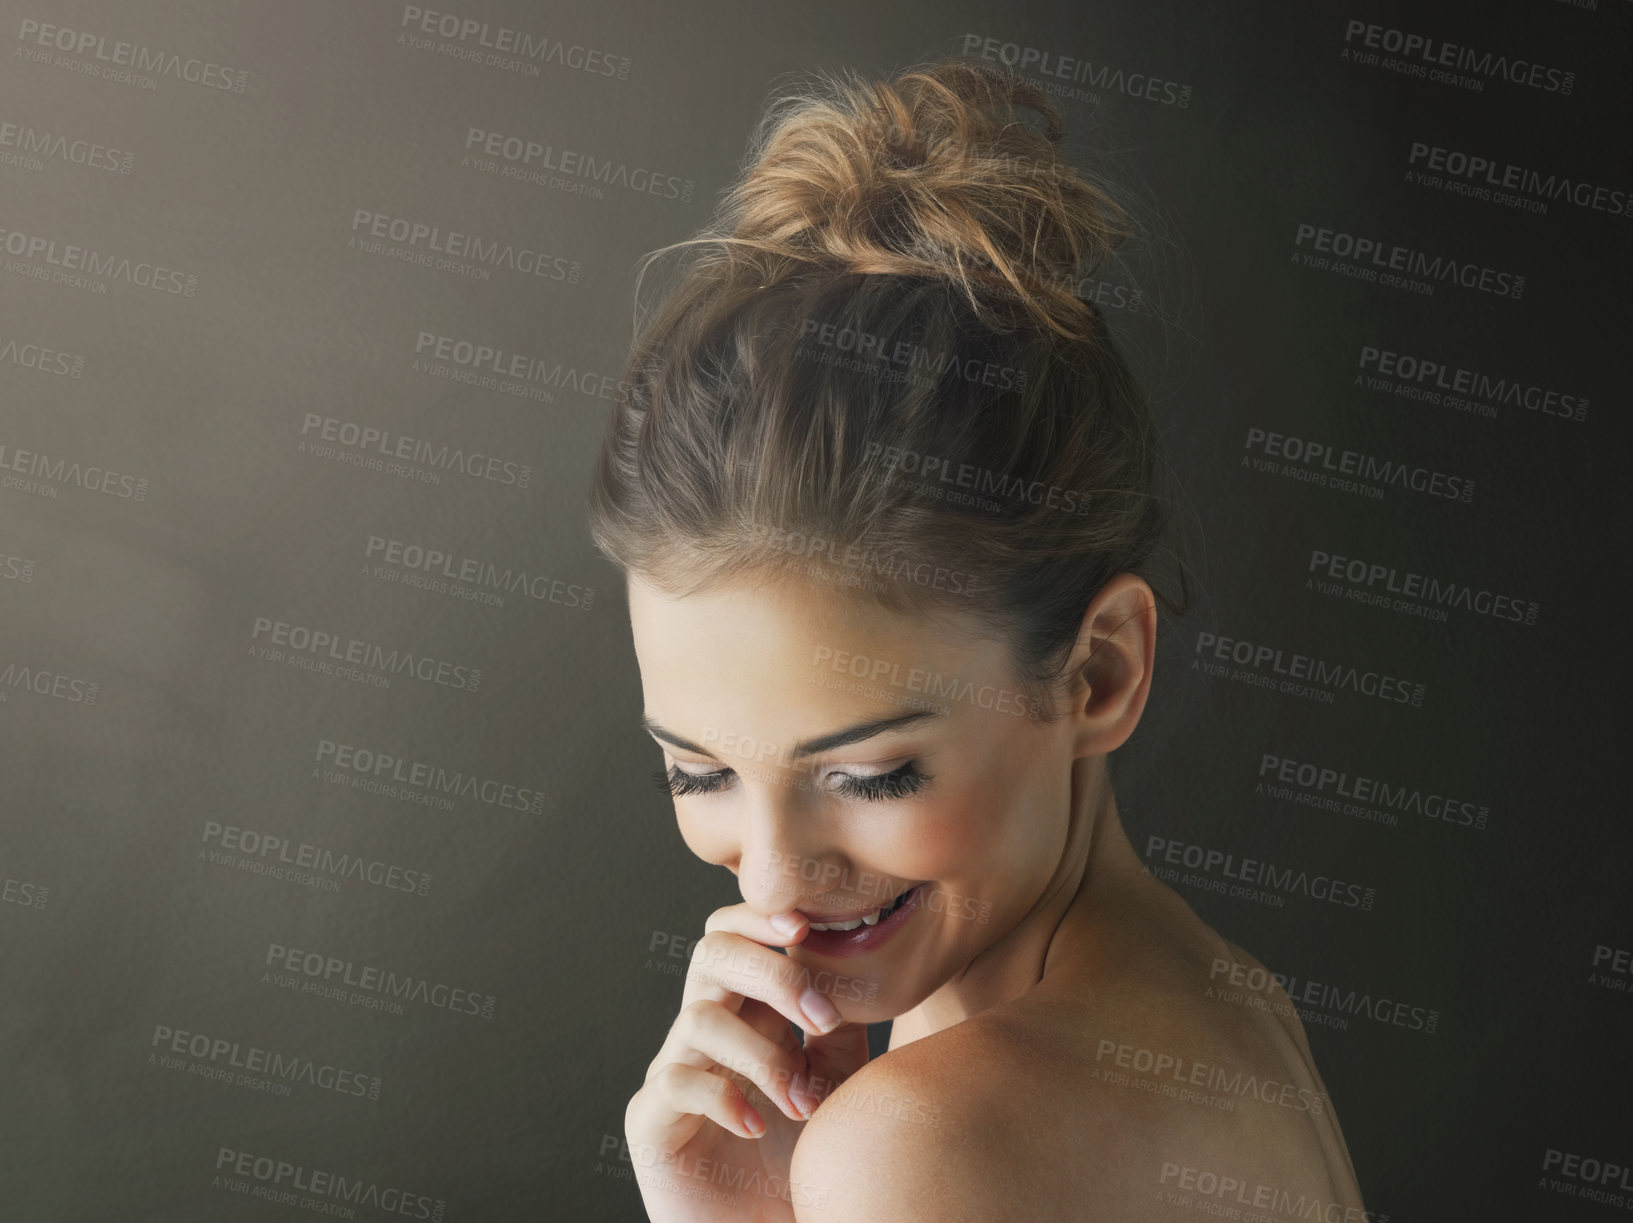 Buy stock photo Studio shot of a beautiful young woman posing against a brown background